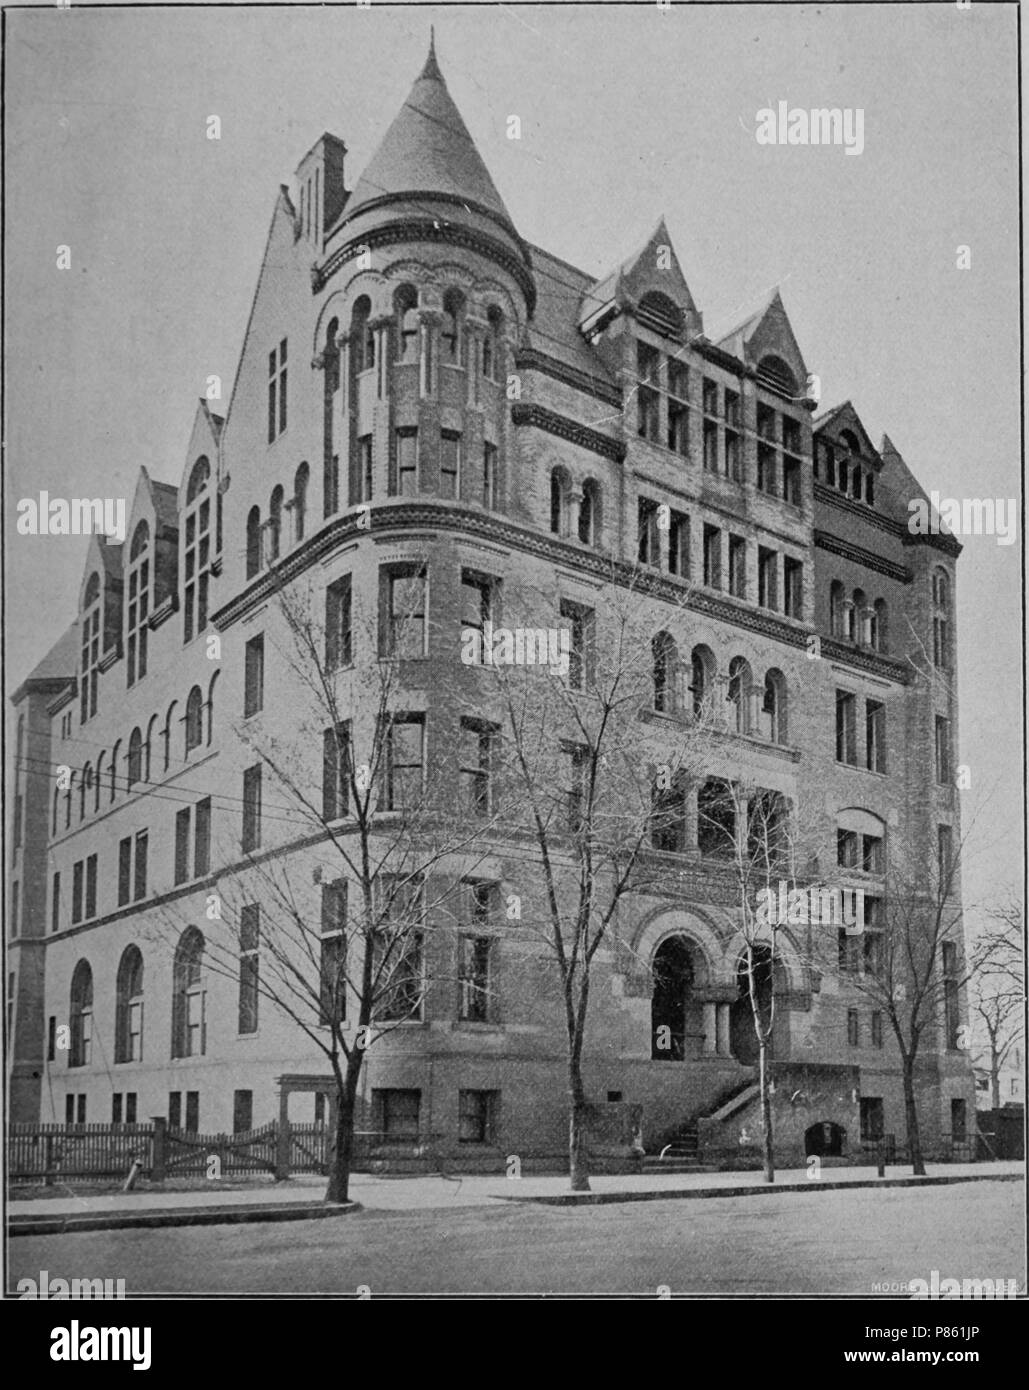 Black and white print illustrating an angled view of the Technical School, a multi-level Romanesque Revival structure with a corner tower, located on College Street in Toronto, Canada, 1903. Courtesy Internet Archive. () Stock Photo